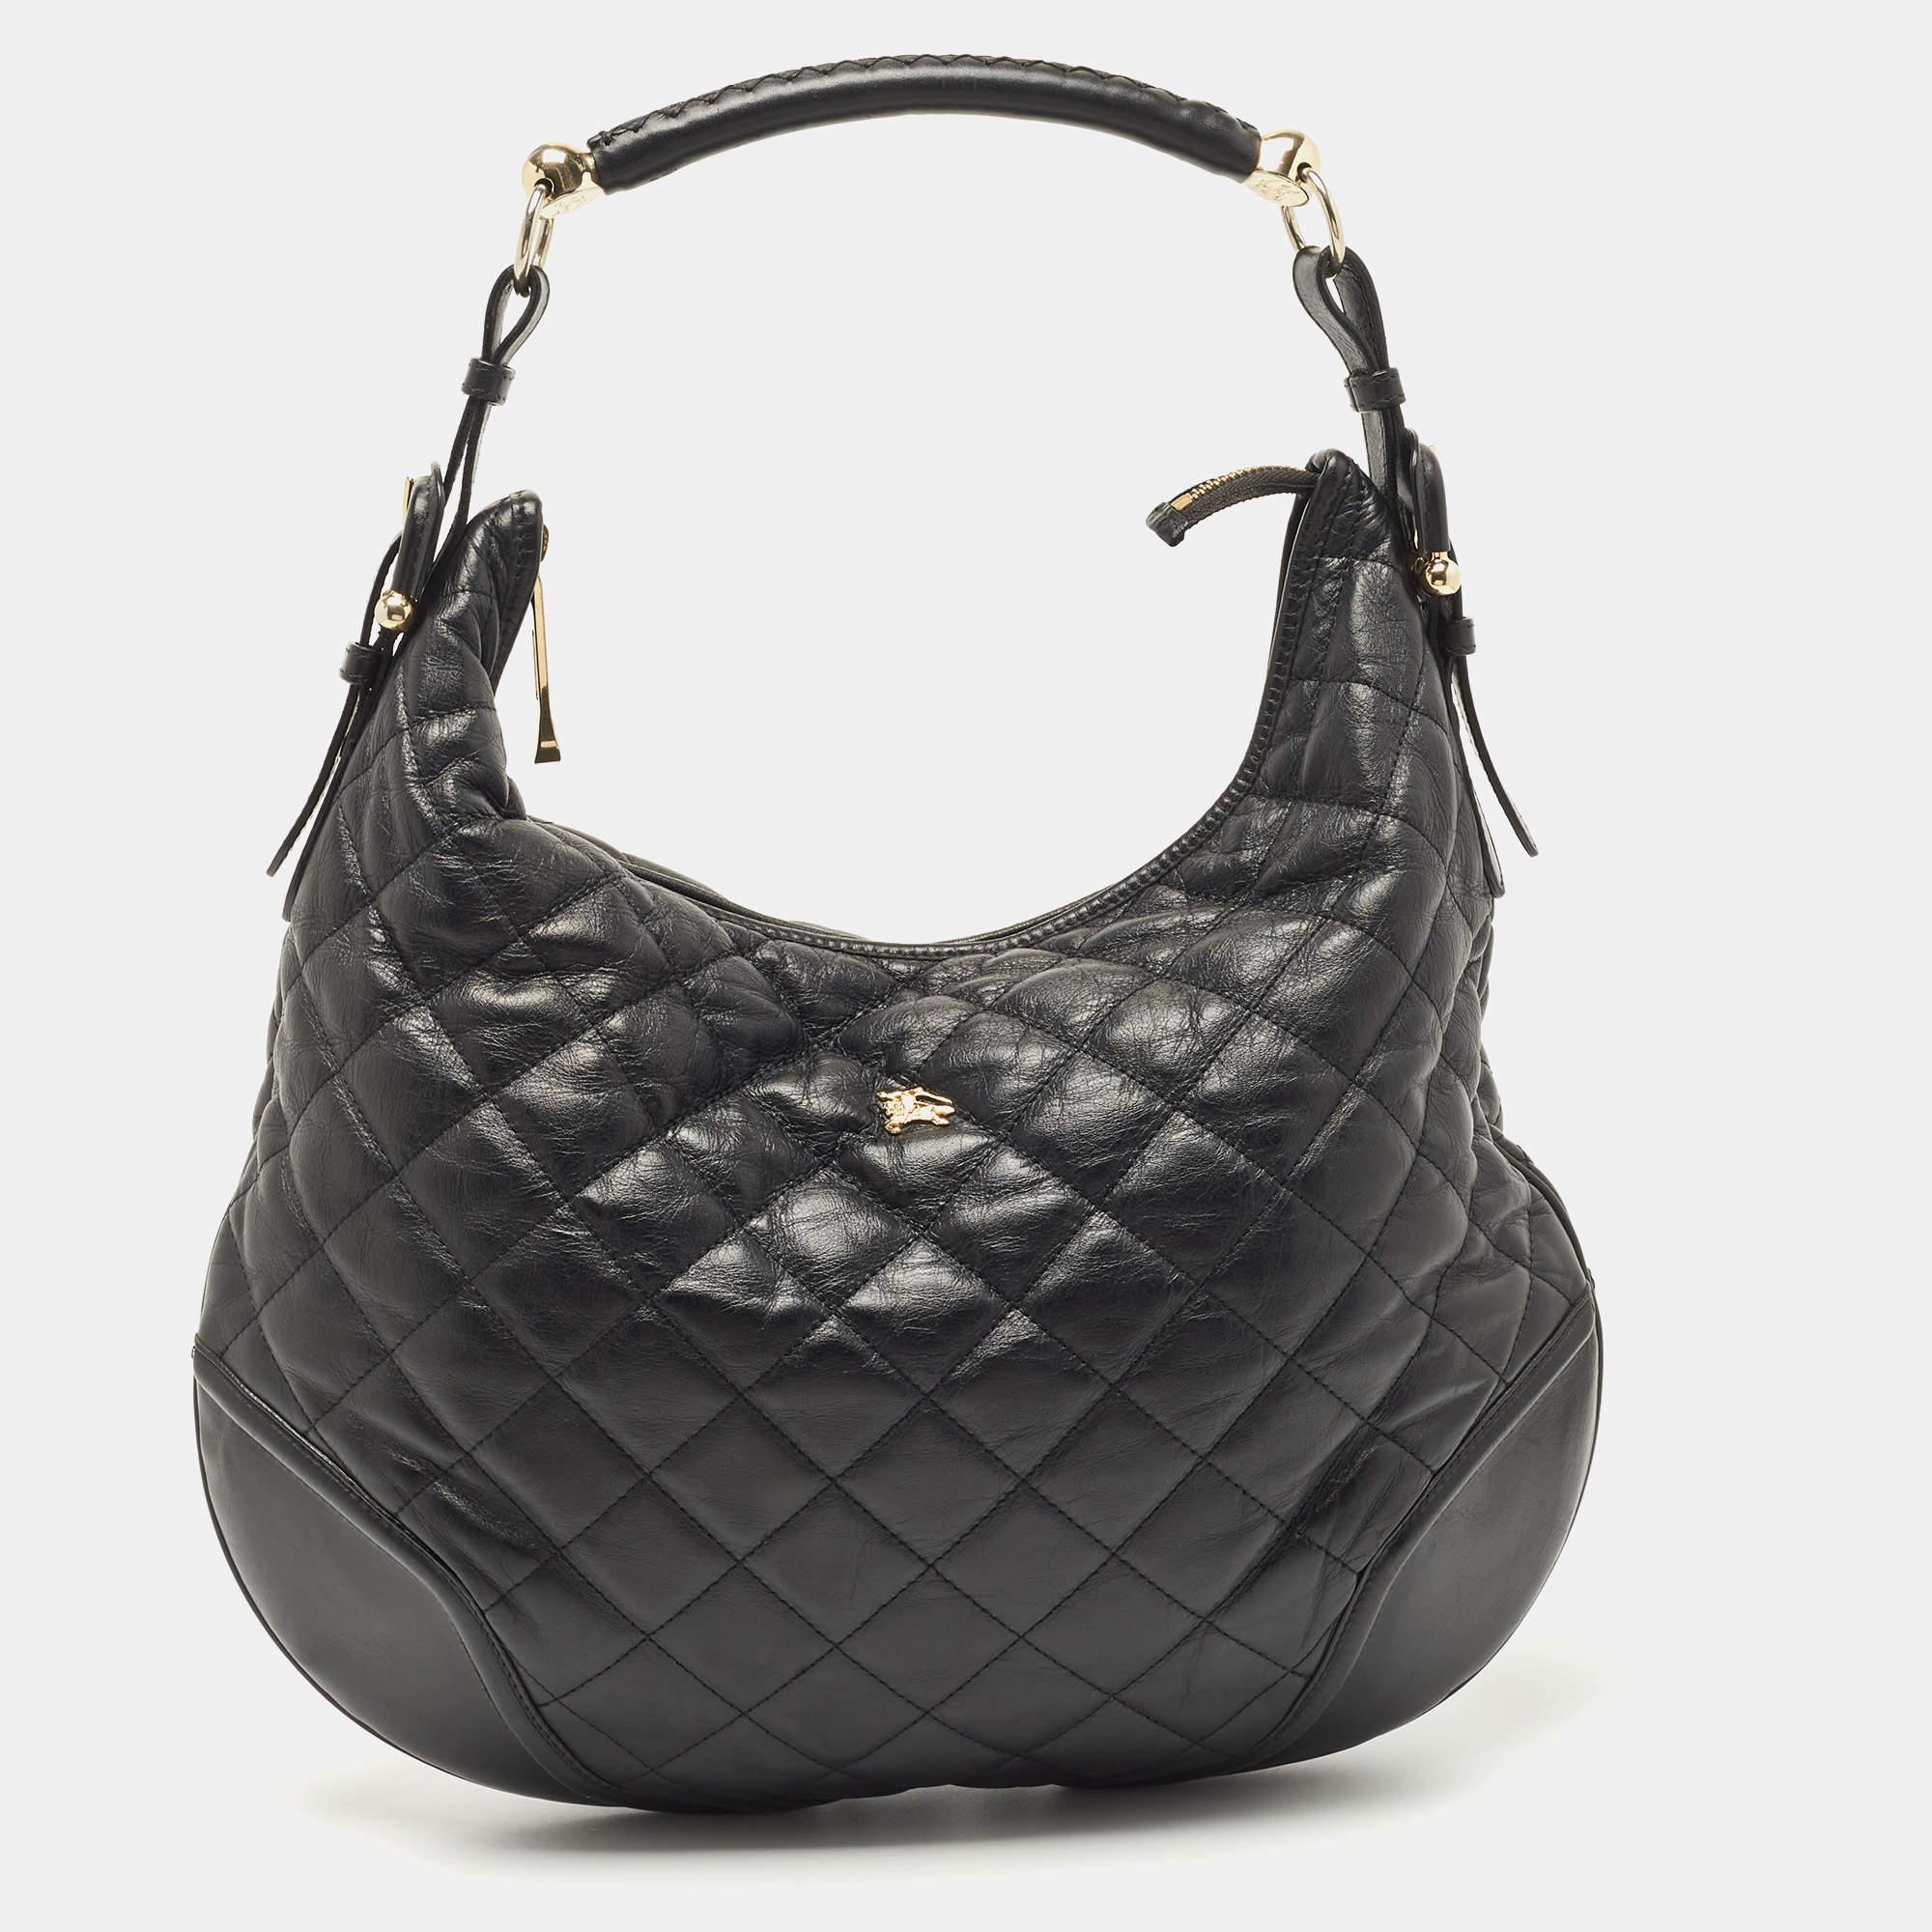 Burberry Black Quilted Leather Hoxton Hobo For Sale 8